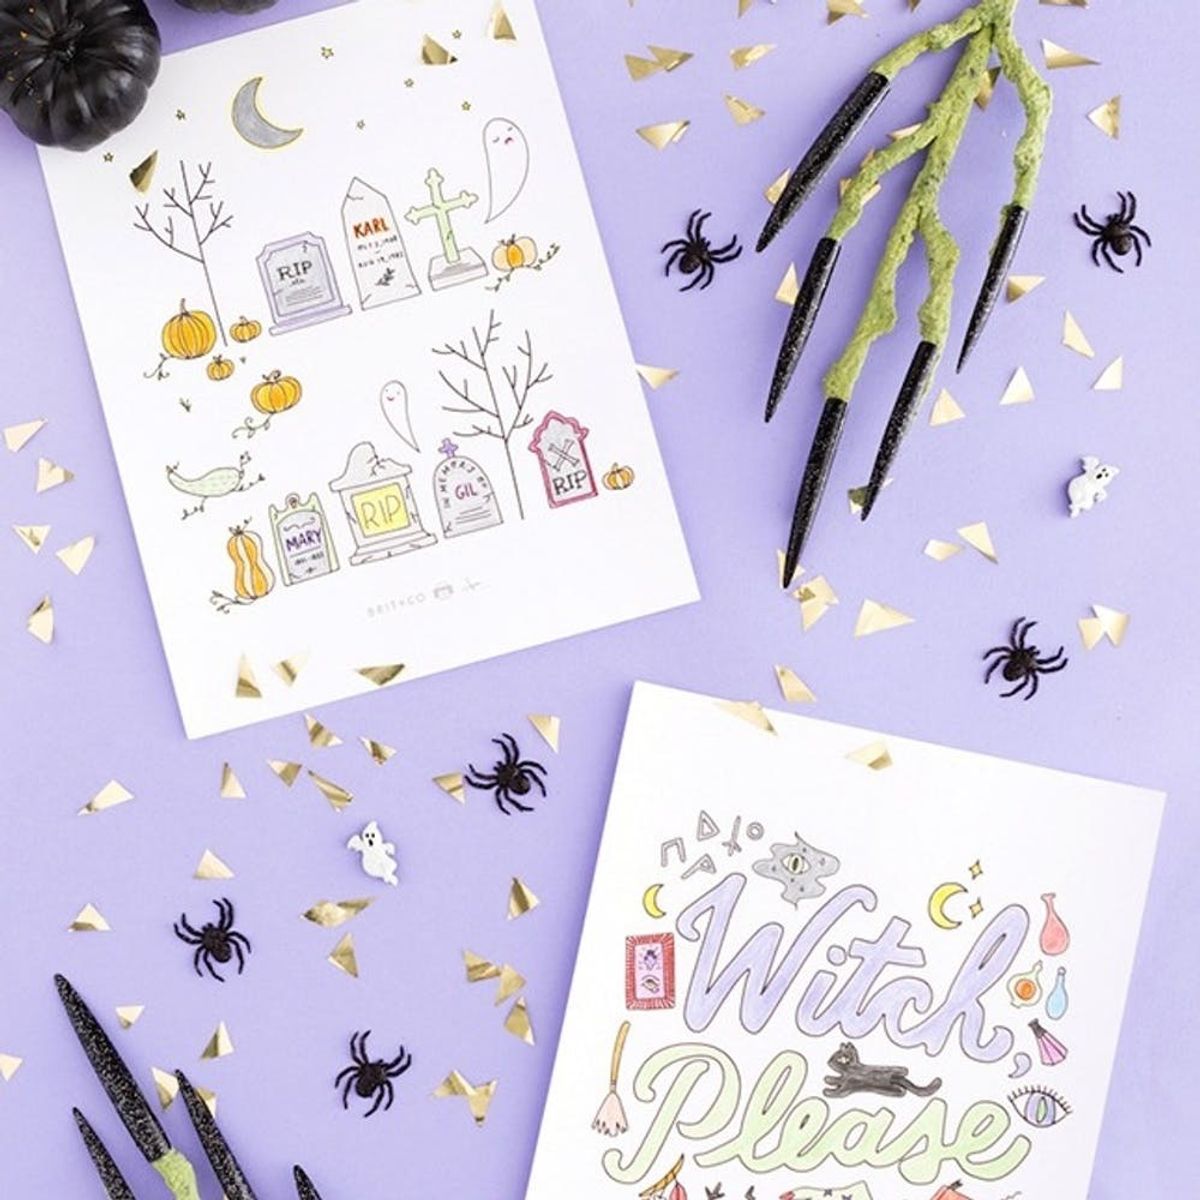 22 Wicked Cool Printables for Your Last-Minute Halloween Party